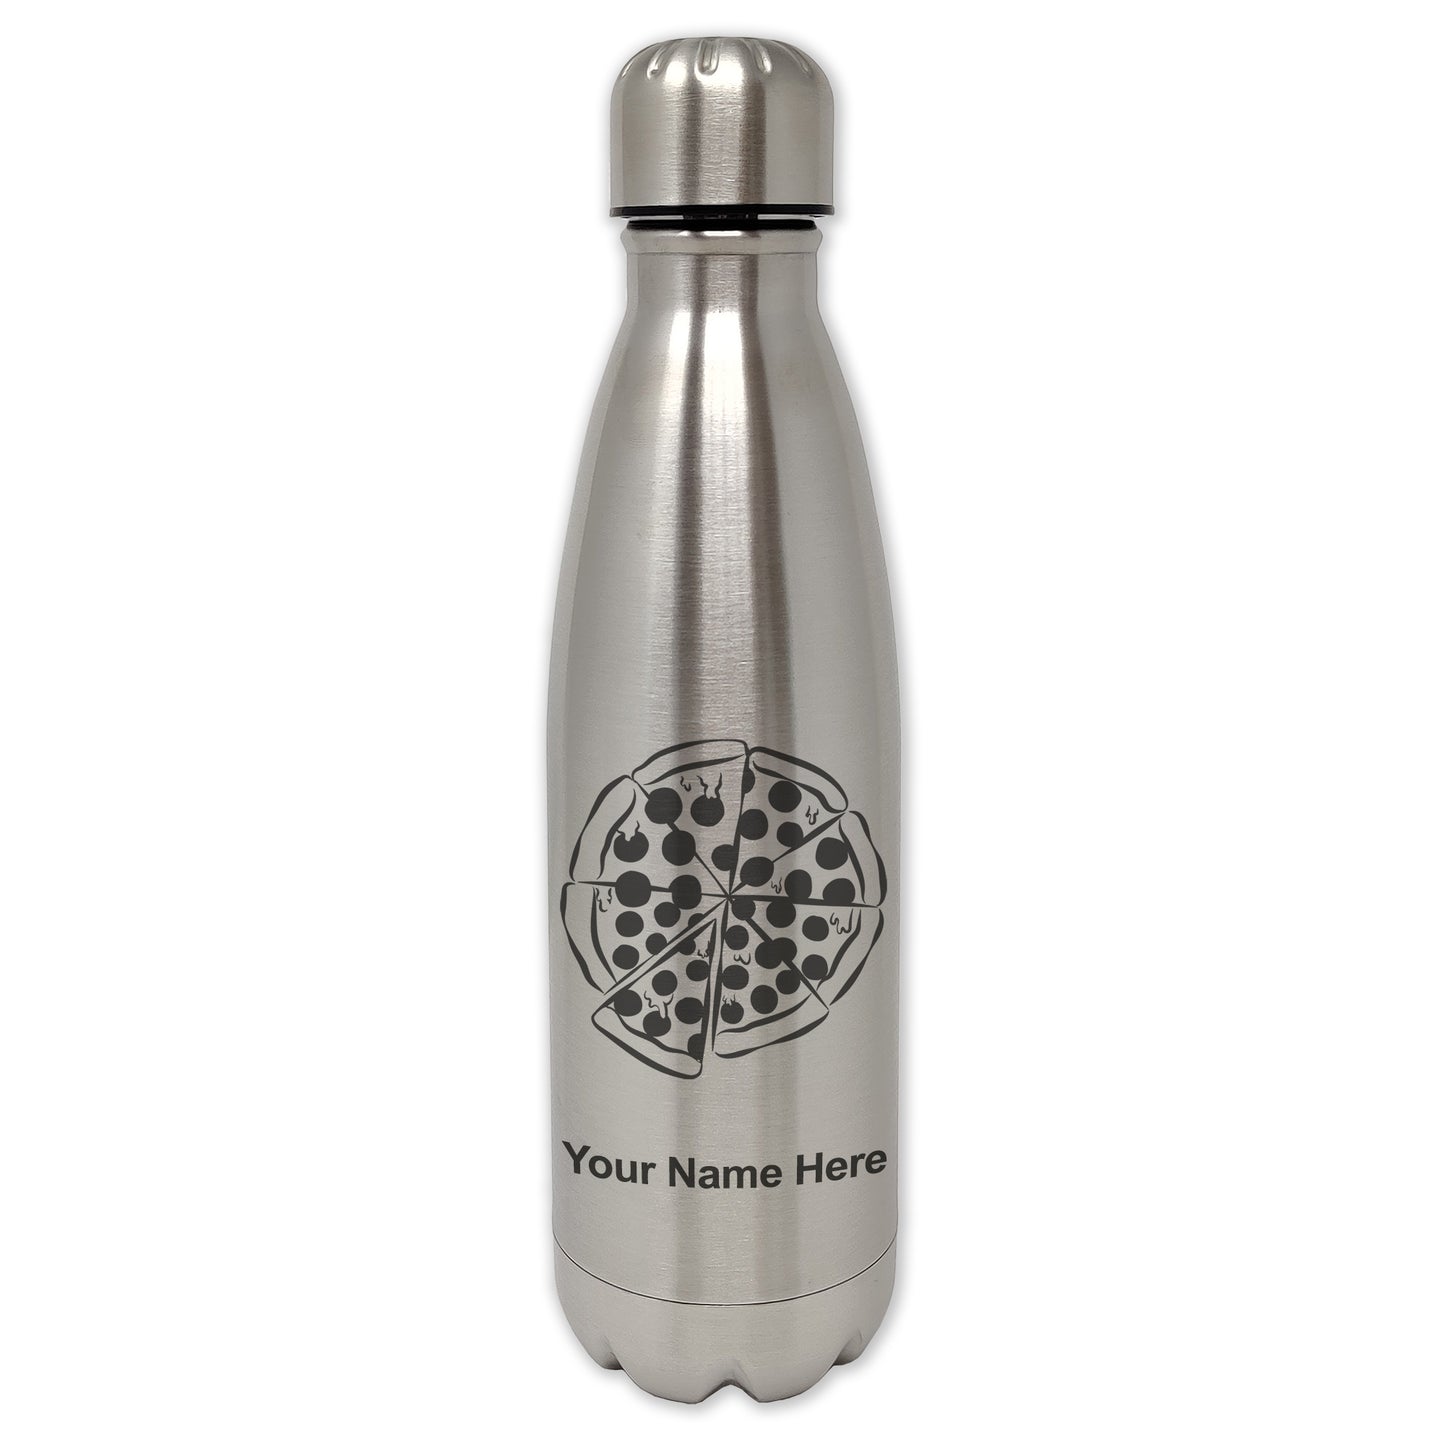 LaserGram Single Wall Water Bottle, Pizza, Personalized Engraving Included